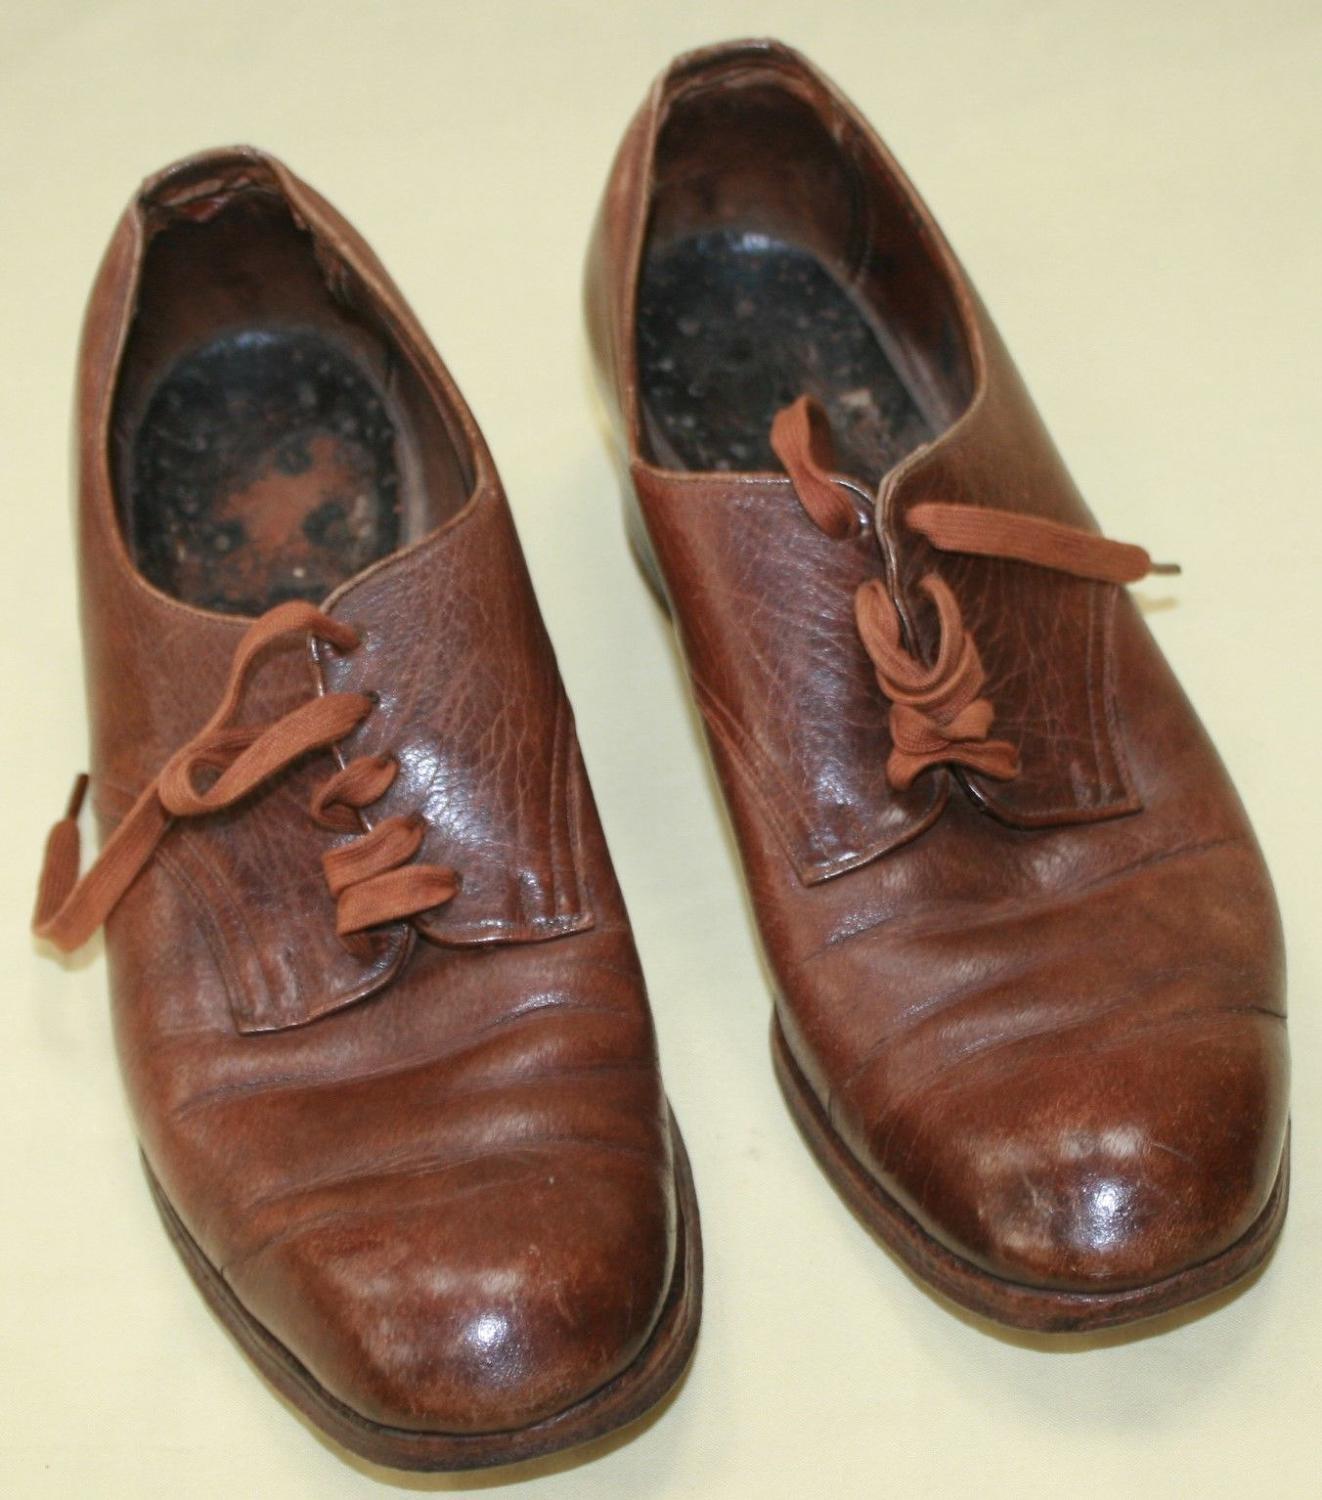 A PAIR OF ATS 1944 DATED SHOES